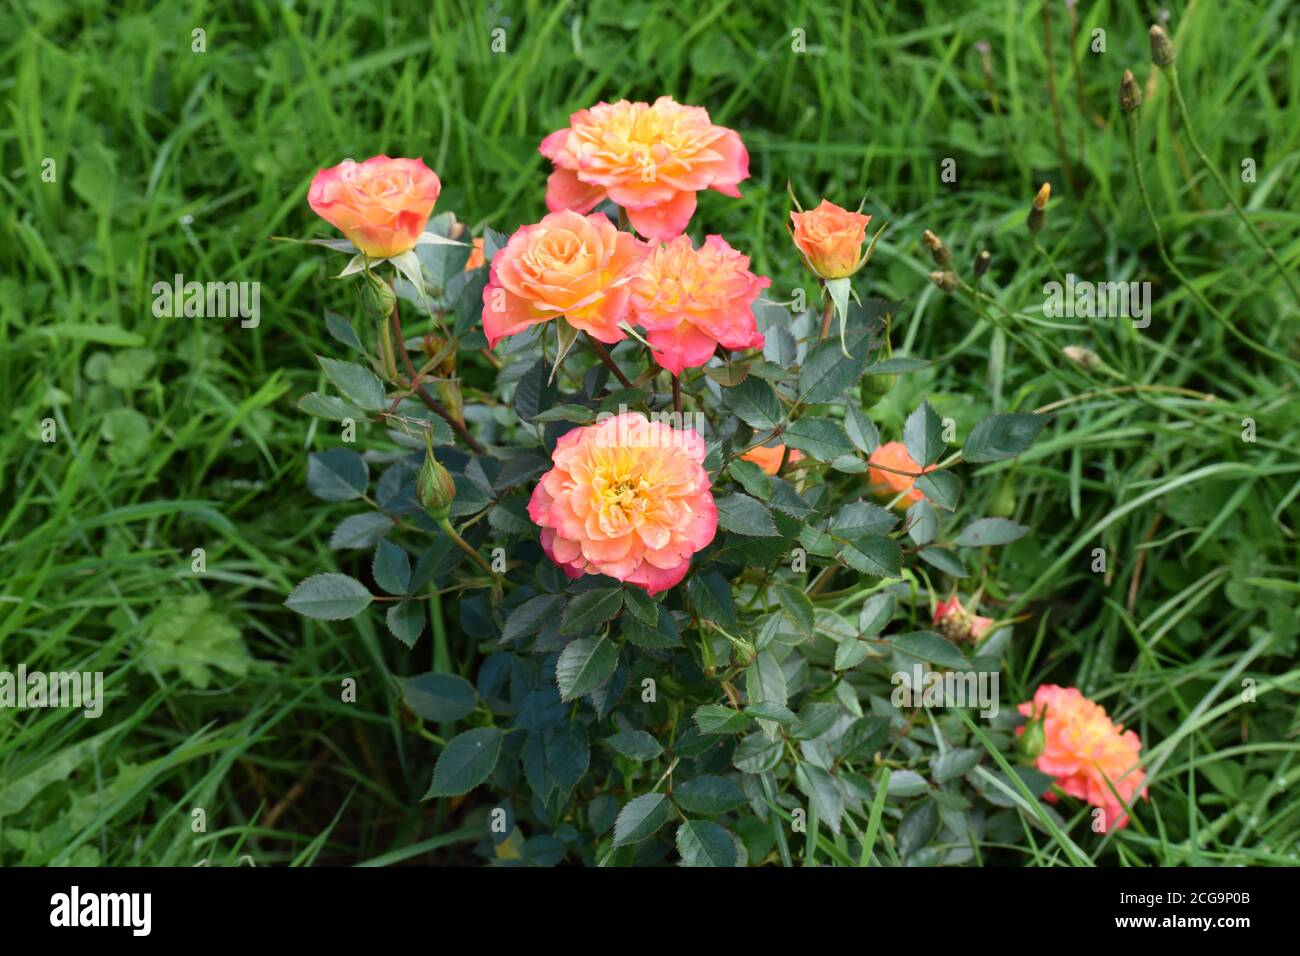 Pink and orange roses in an Irish Country garden during the Summer Stock Photo